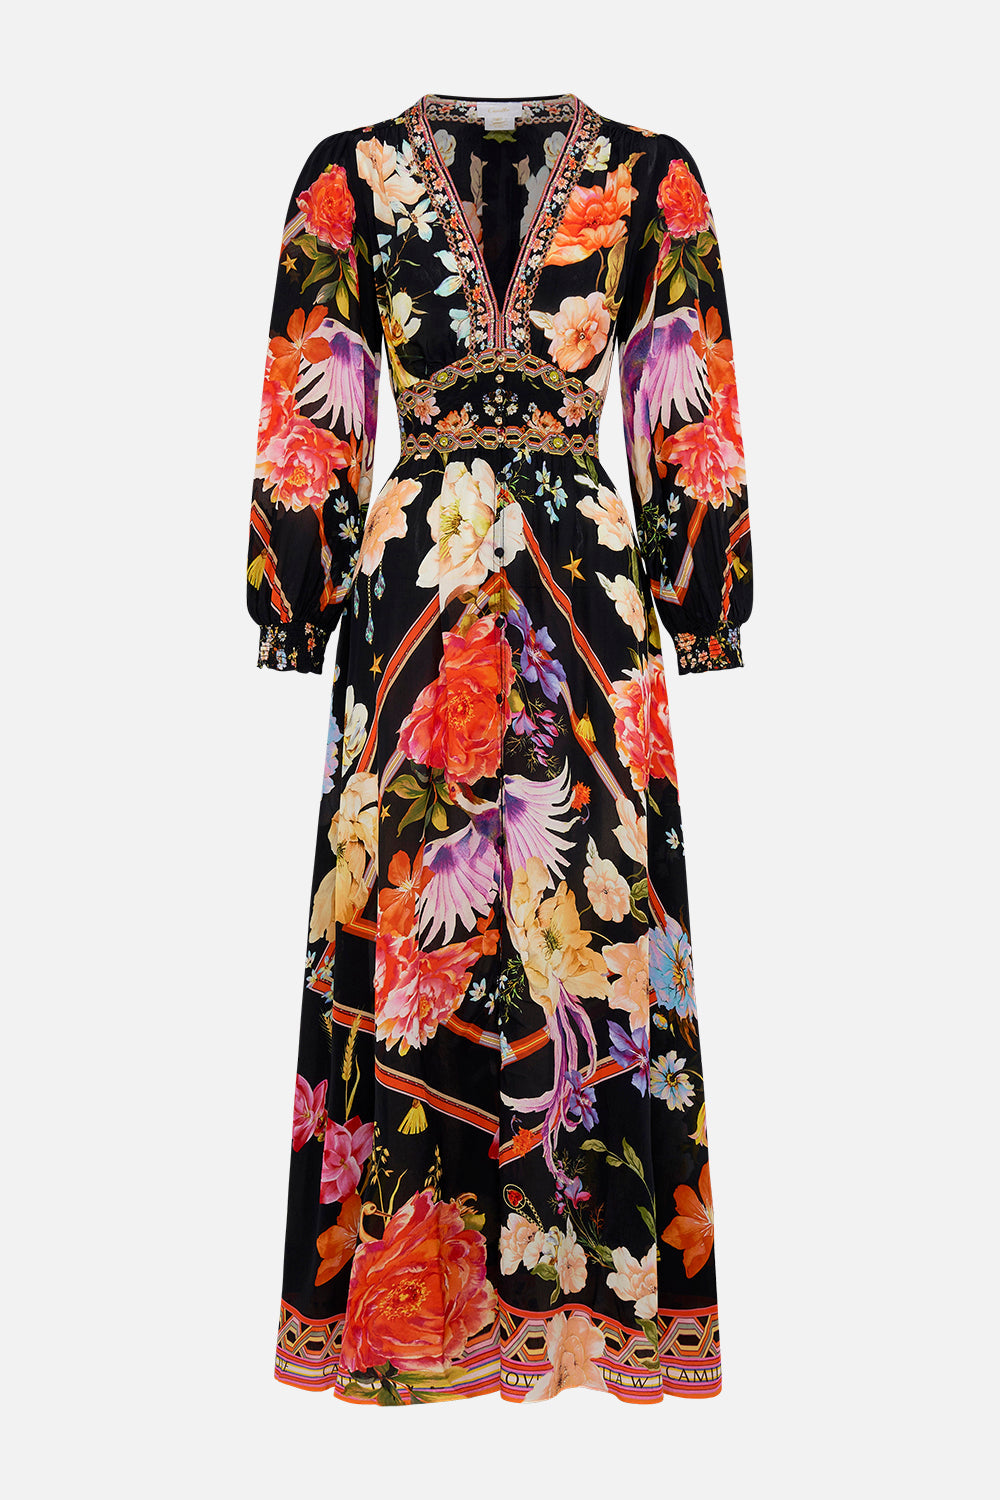 Product view of CAMILLA silk maxi dress in Secret History floral print